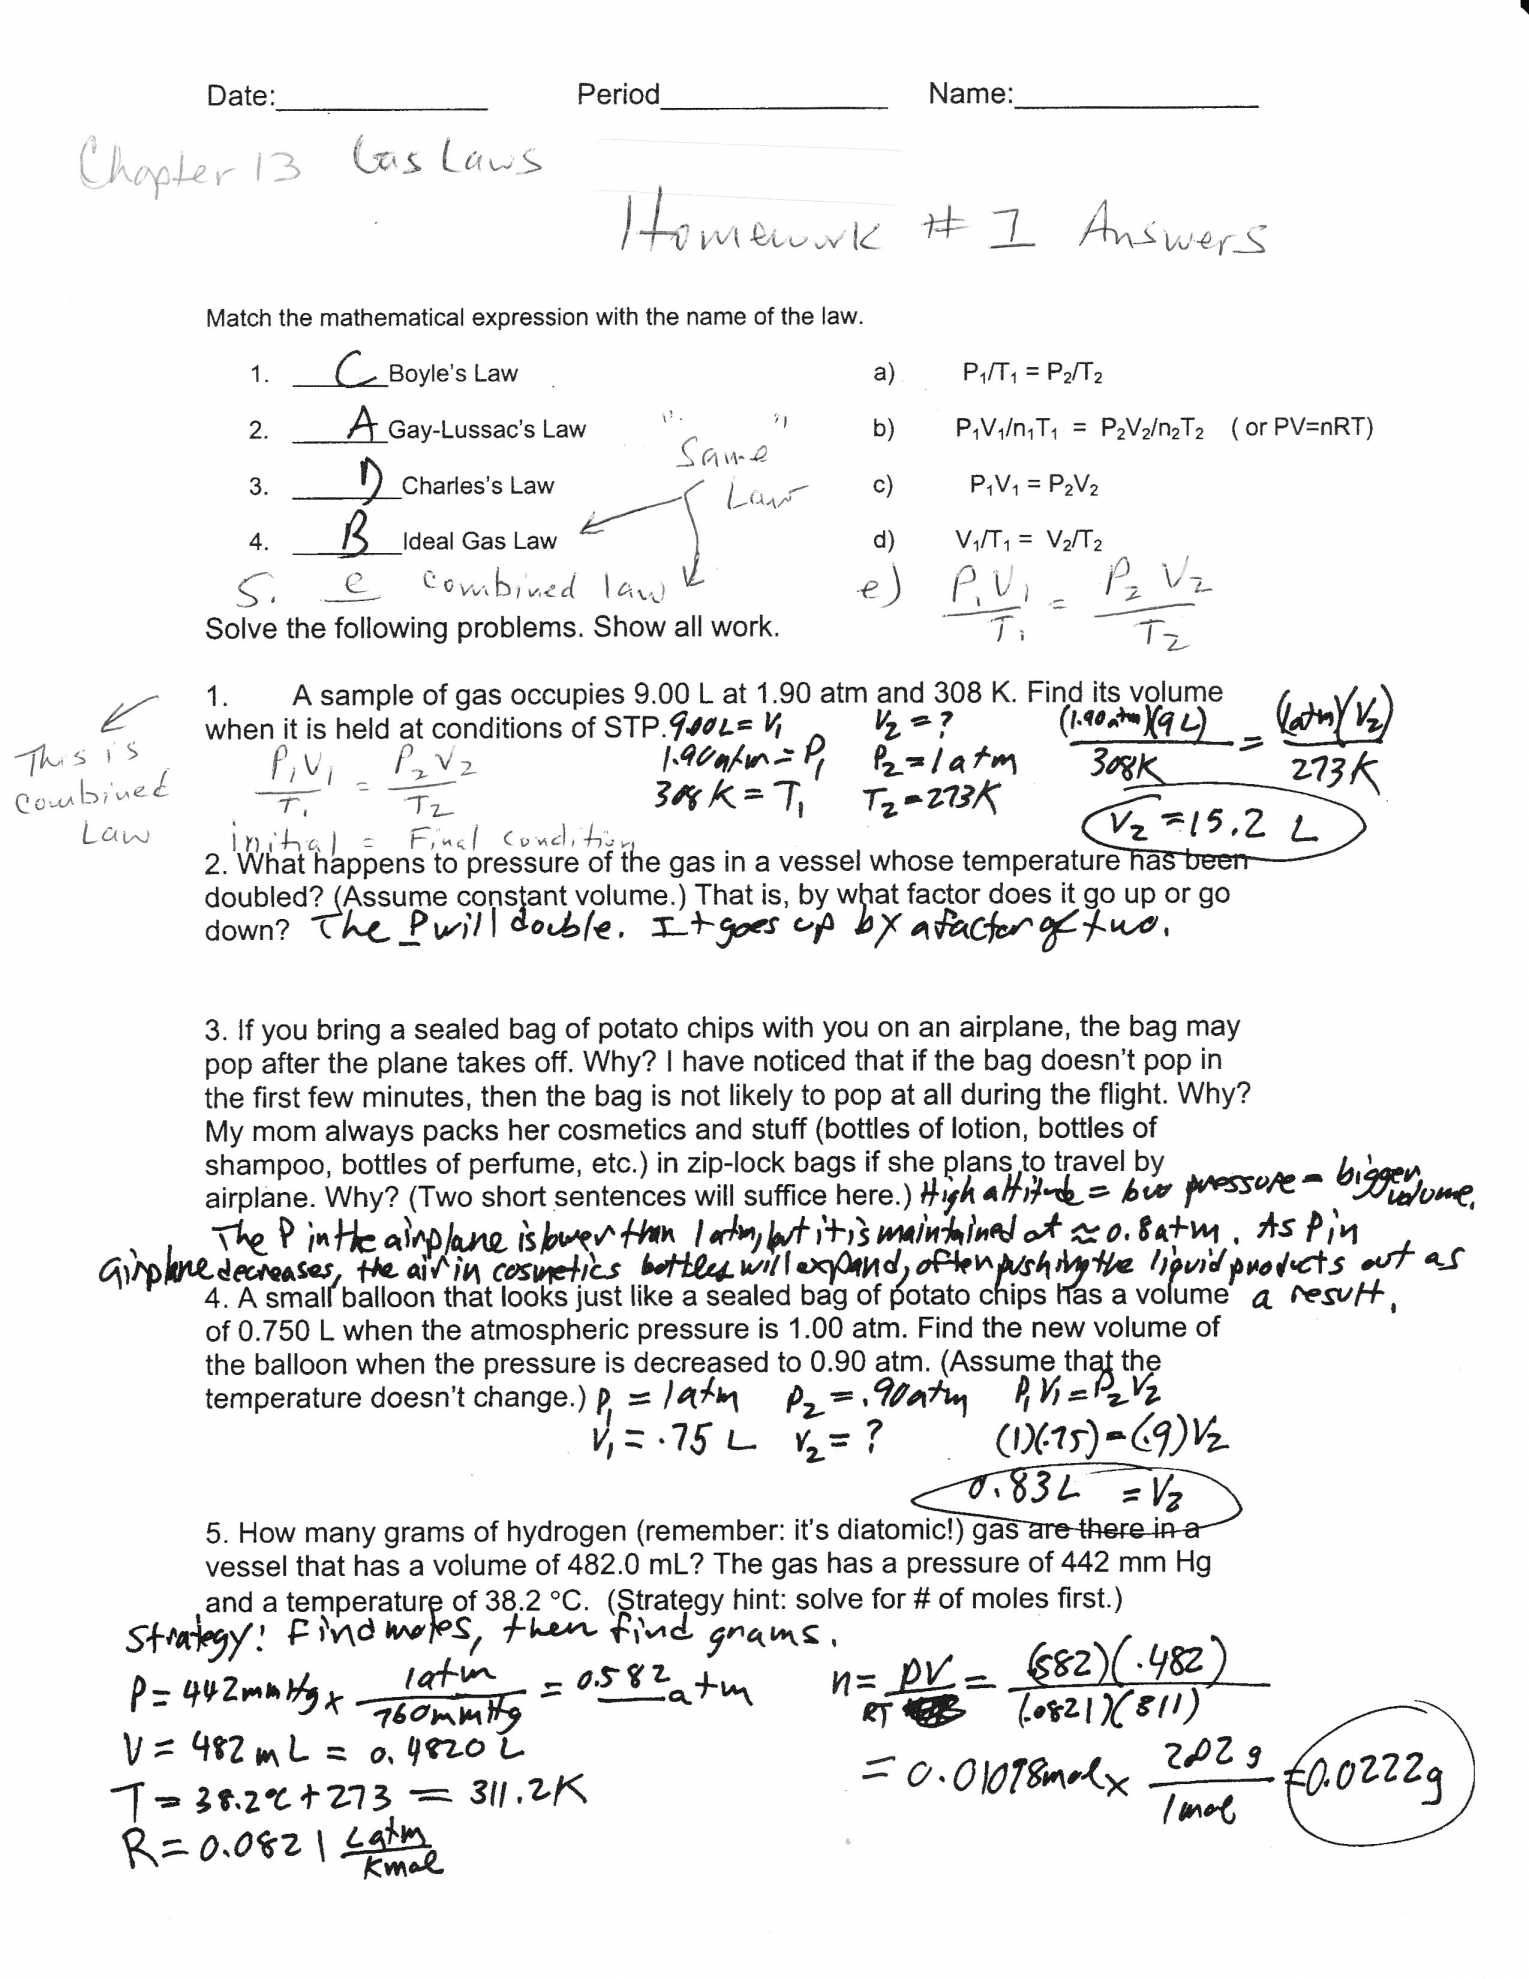 Gas Laws Practice Problems Worksheet Answers